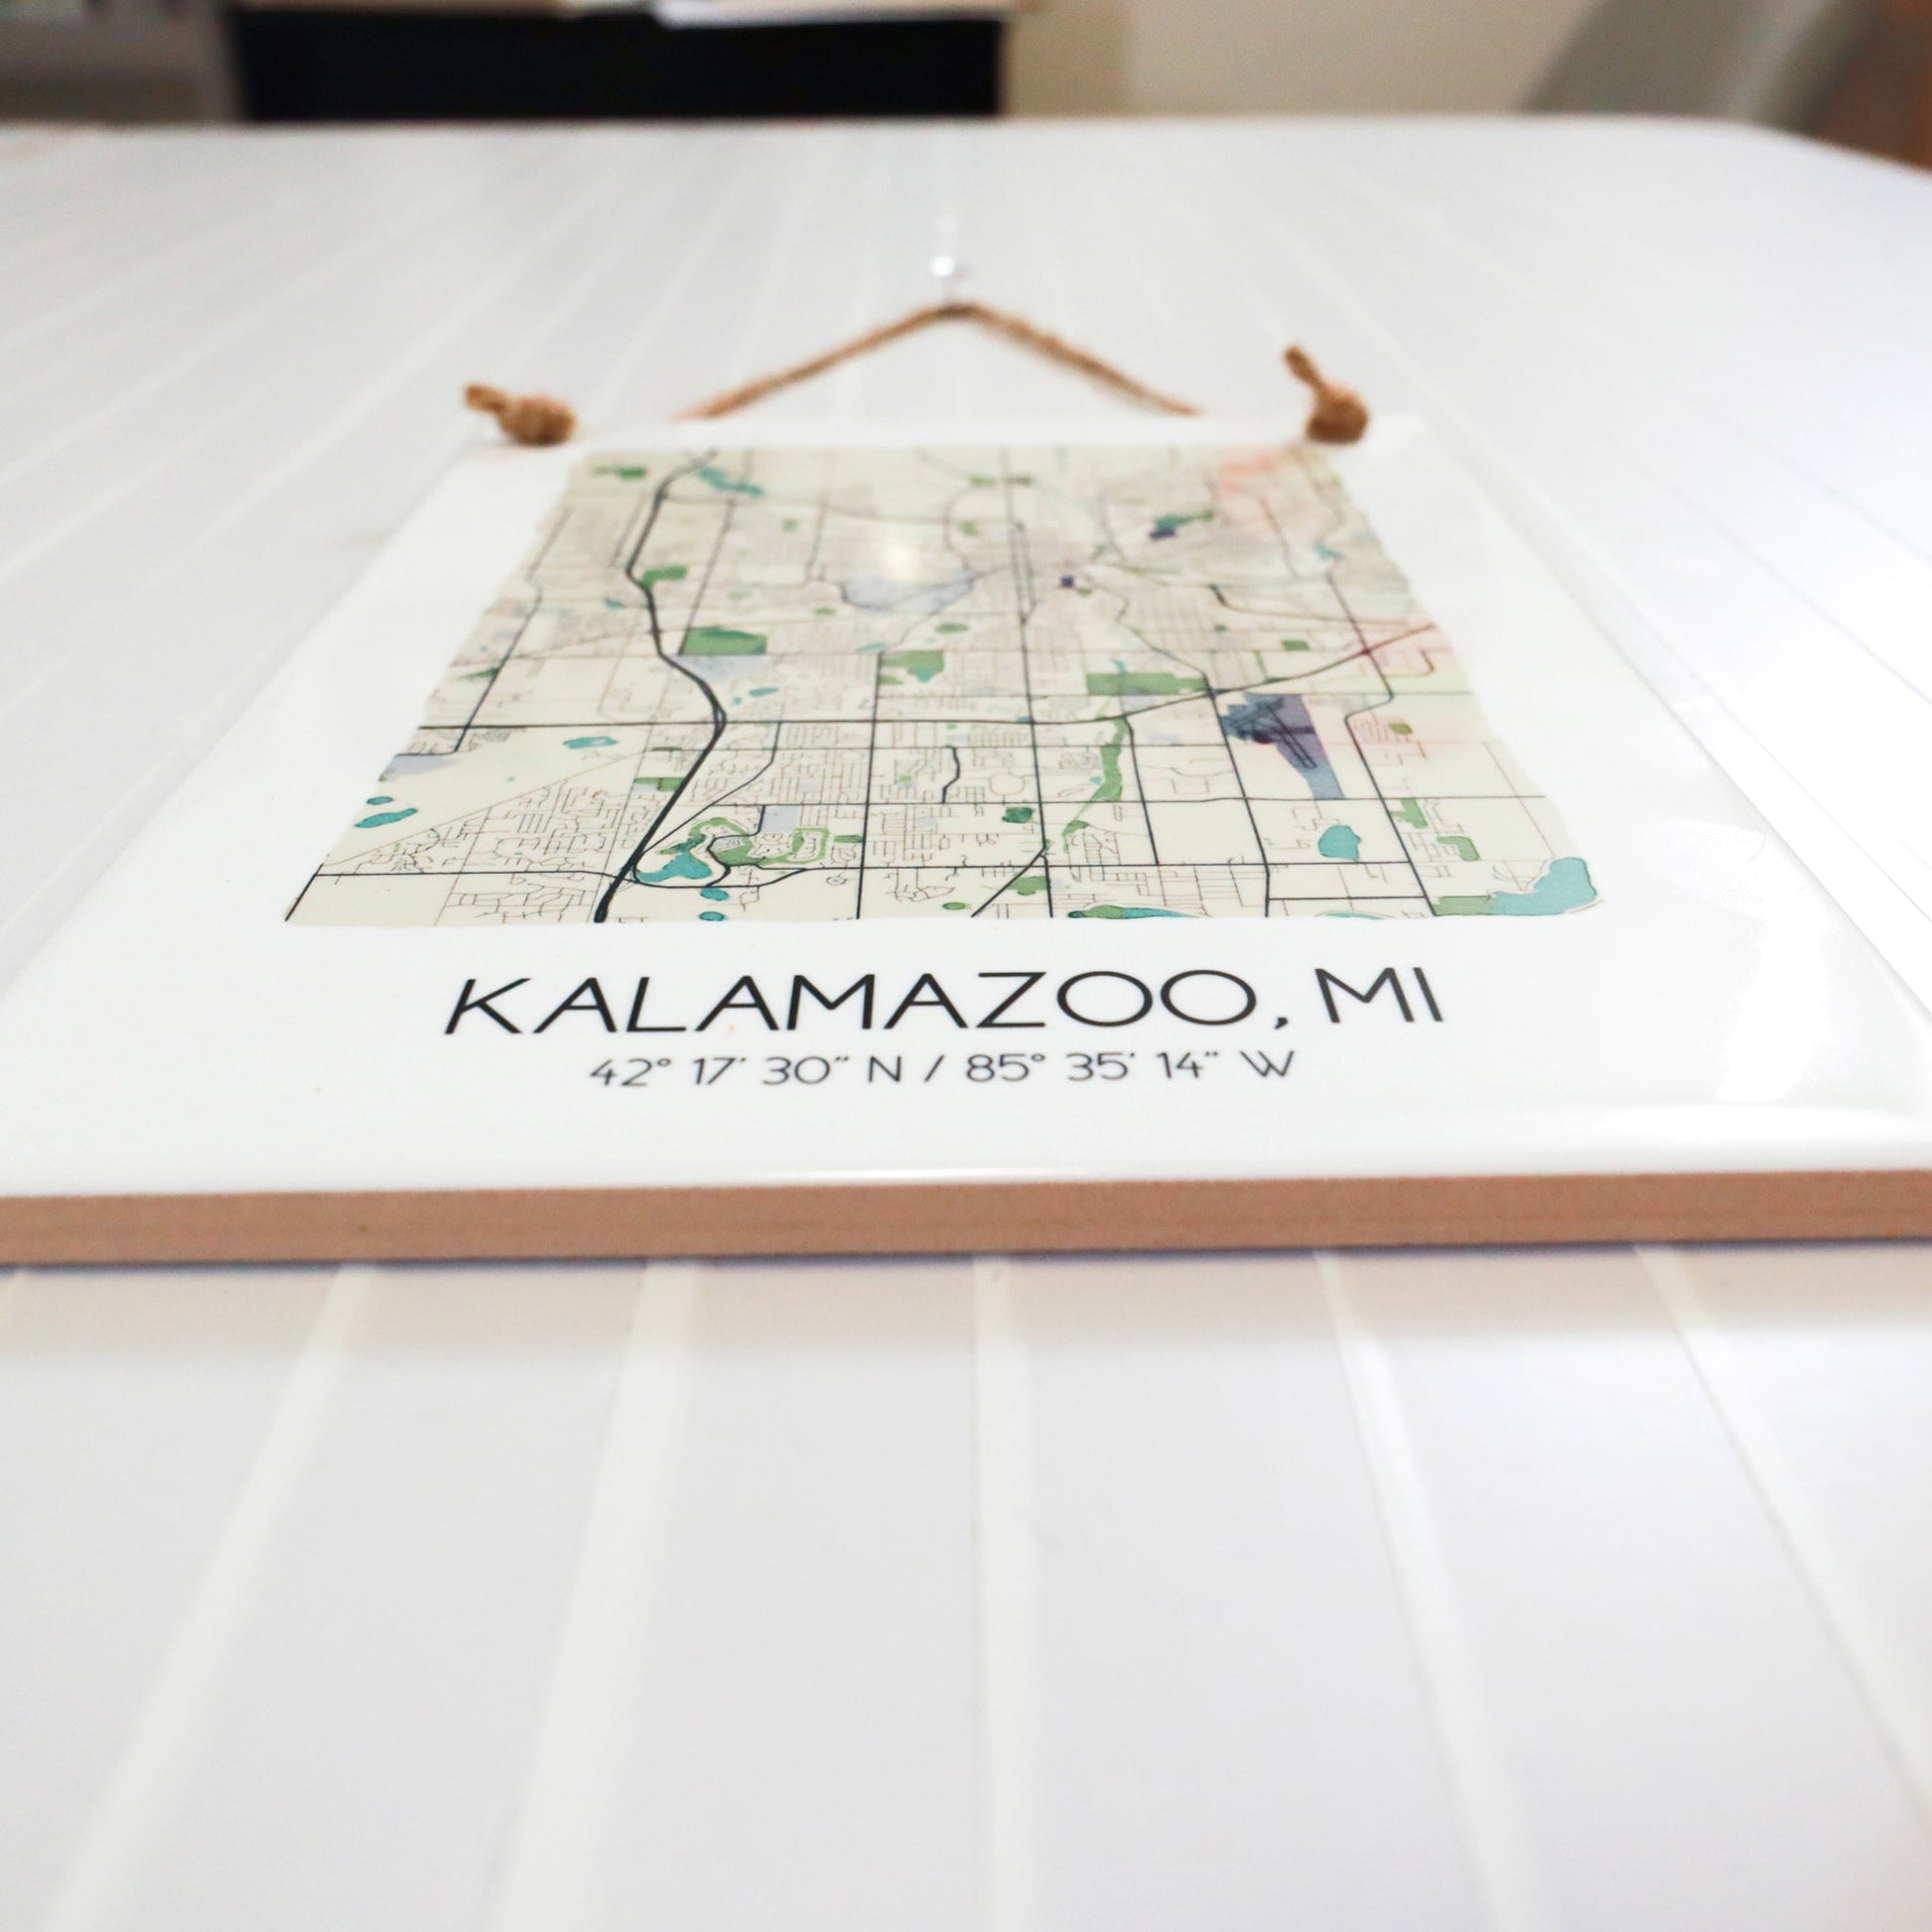 A close-up of a city map tile sign sitting on a table, showing the ceramic tile edges